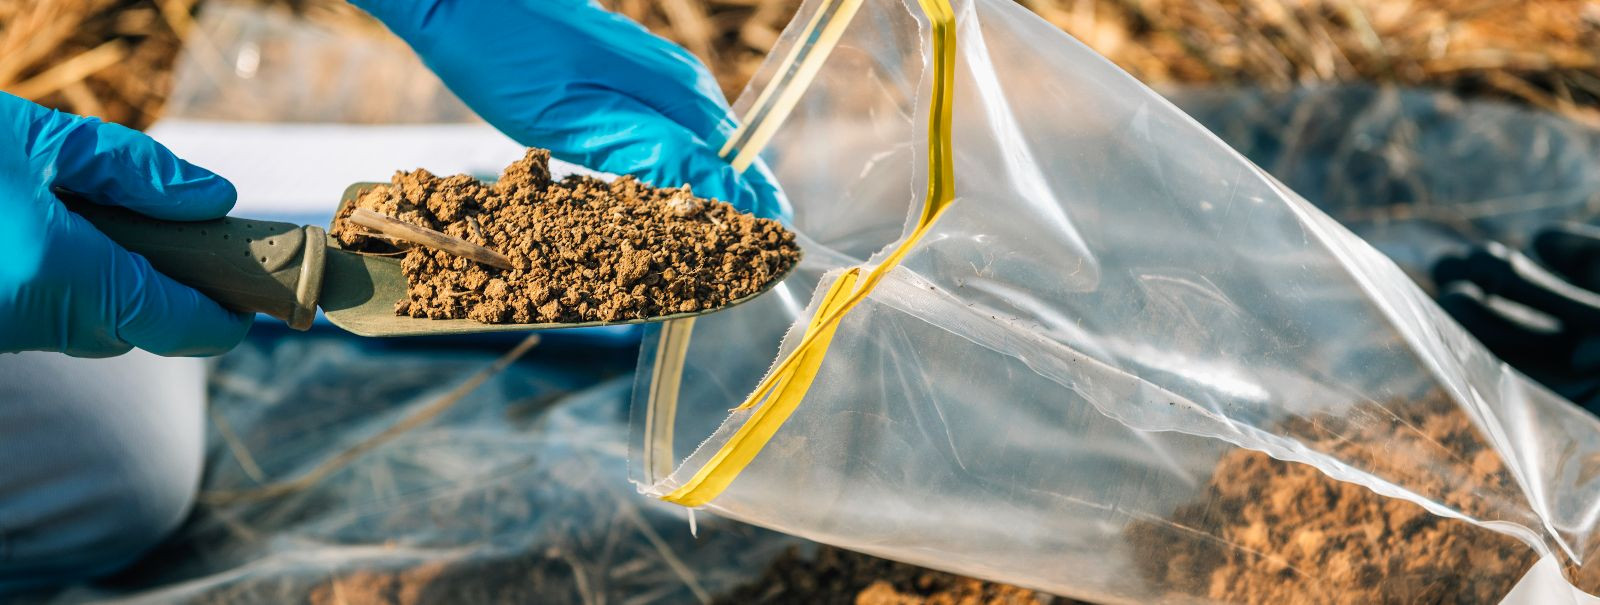 Soil pollution refers to the presence of toxic chemicals, heavy metals, or other pollutants in the soil at levels that pose a risk to human health and the envir